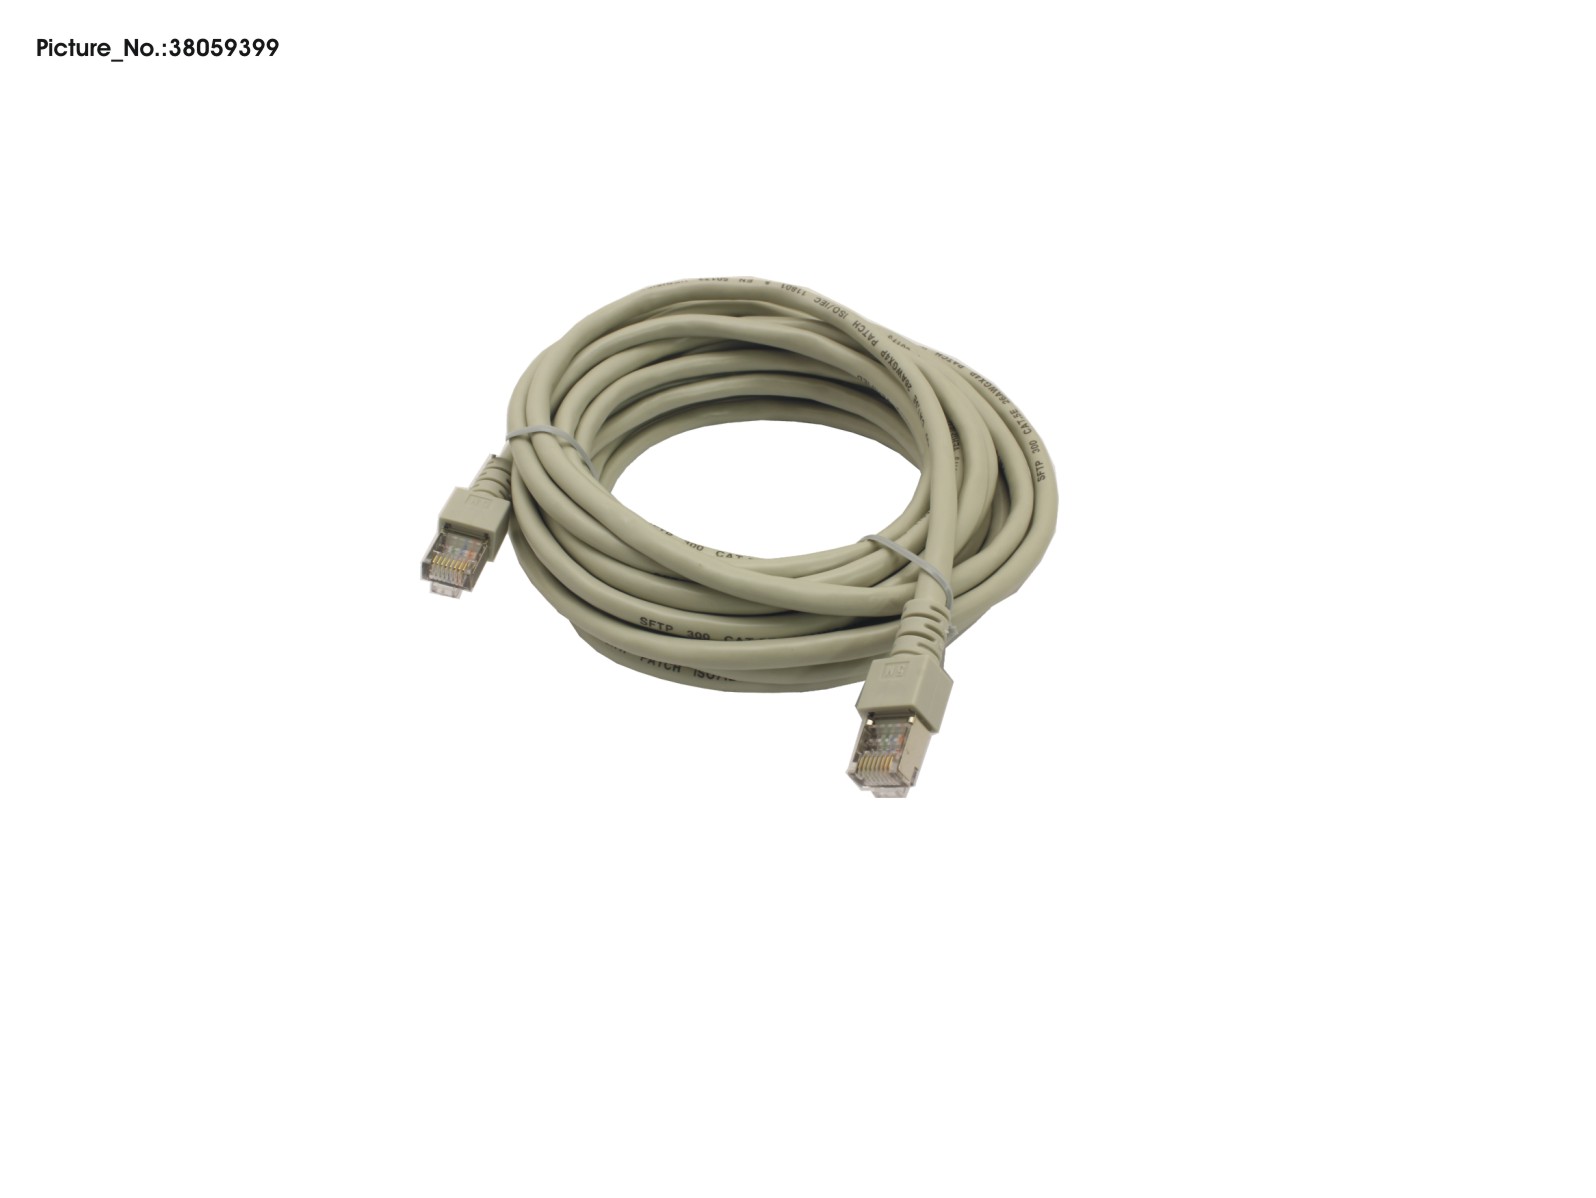 PATCHCABLE 5M GREY